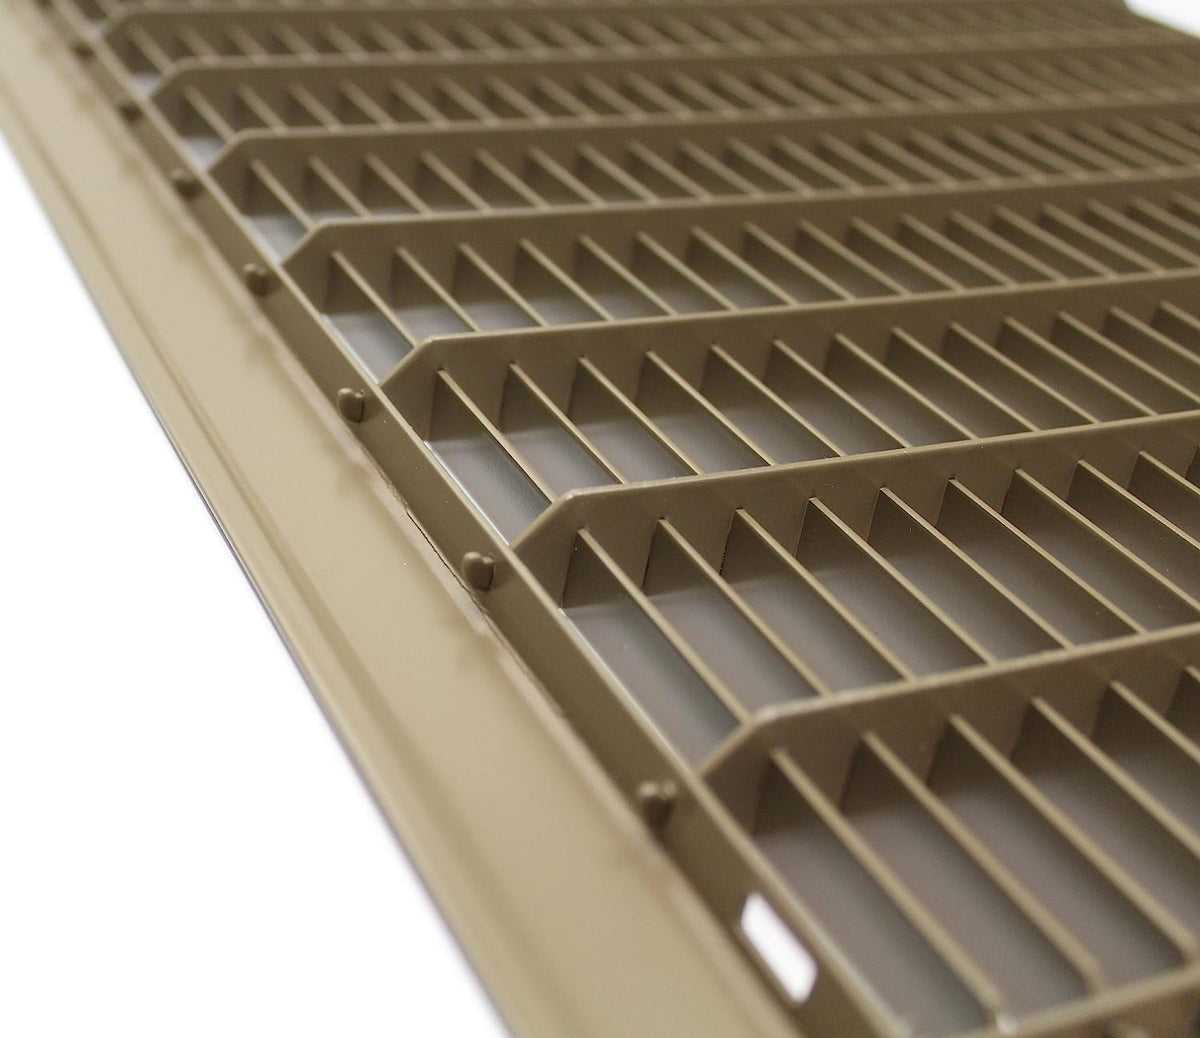 8&quot; X 30&quot; Or 30&quot; X 8&quot; Heavy Duty Floor Grille - Fixed Blades Air Grille - Brown [Outer Dimensions: 9.75 X 31.75]